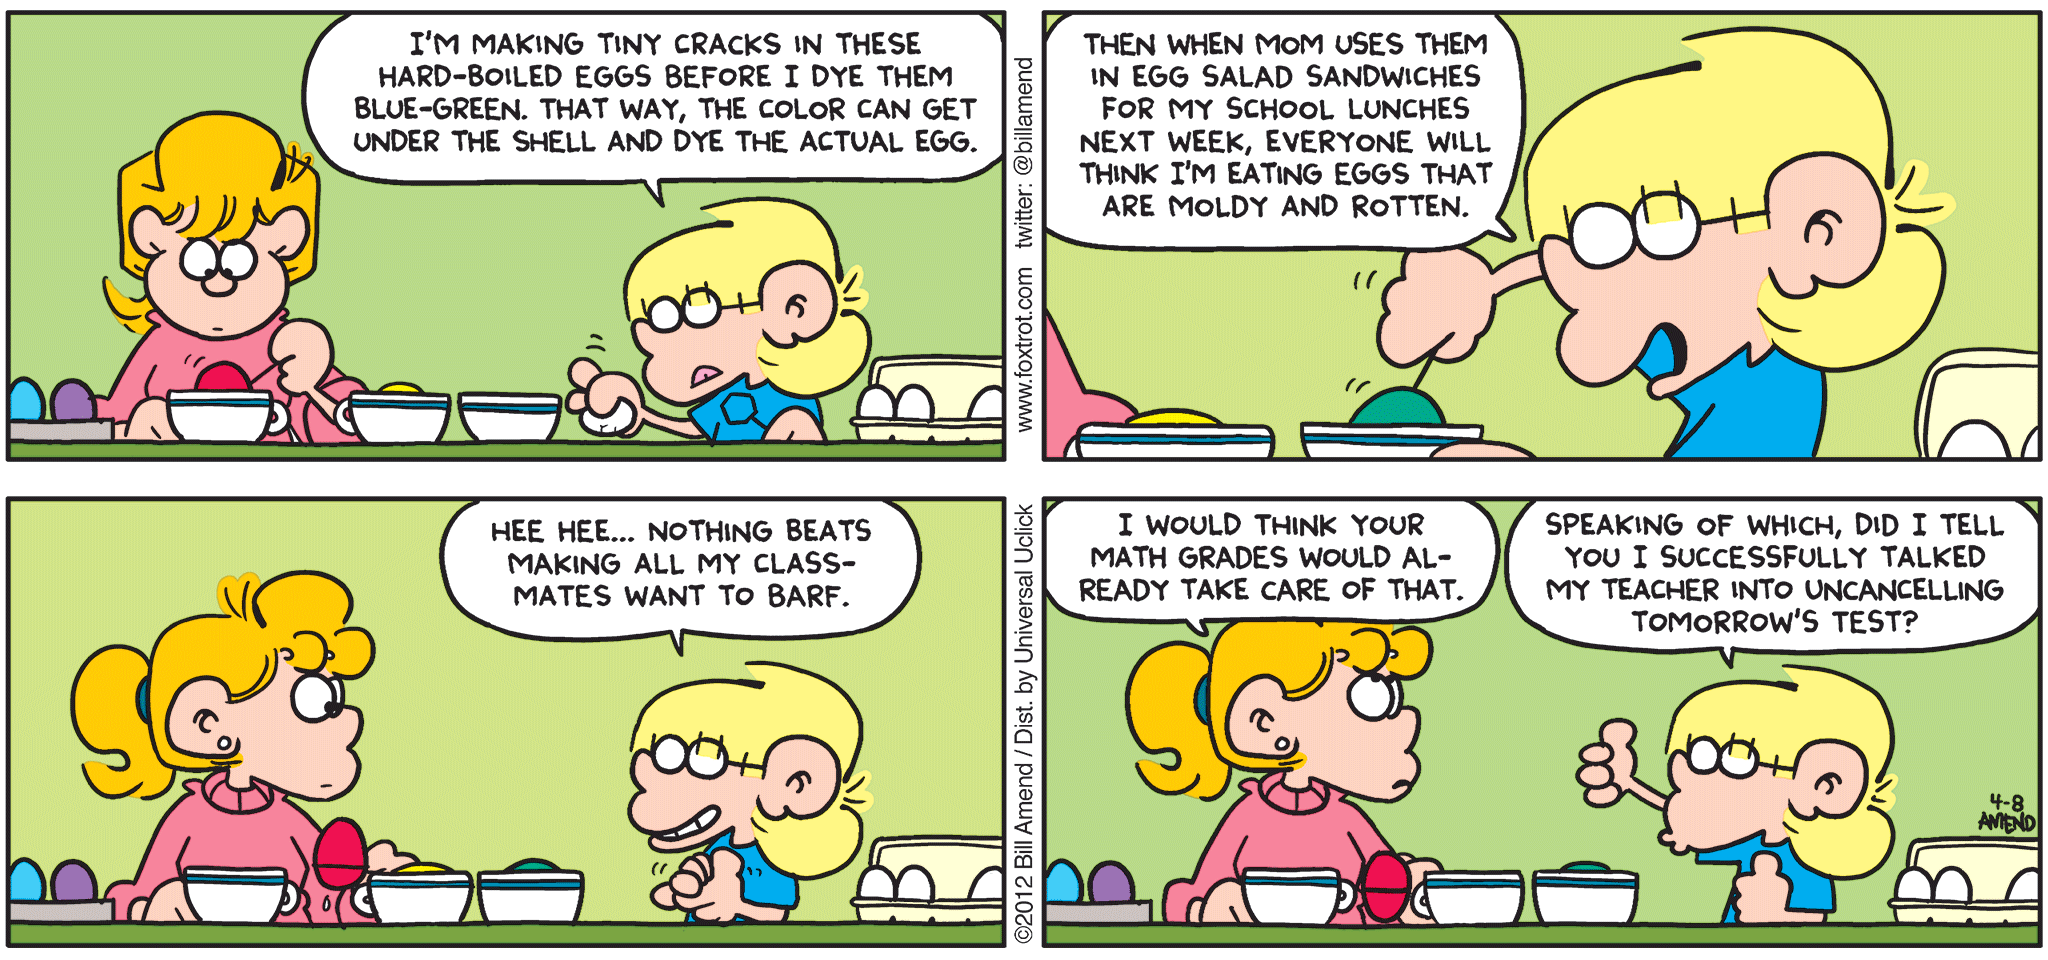 FoxTrot comic strip by Bill Amend - "Rotten Eggs" published April 8, 2012 - Jason: I'm making tiny cracks in these hard-boiled eggs before I dye them blue-green. That way, the color can get under the shell and dye the actual egg. Then when mom uses them in egg salad sandwiches for my school lunches next week, everyone will think I'm eating eggs that are moldy and rotten. Hee hee...nothing beats making all my classmates want to barf. Paige: I would think your math grades would already take care of that. Jason: Speaking of which, did I tell you I successfully talked my teacher into uncancelling tomorrow's test?